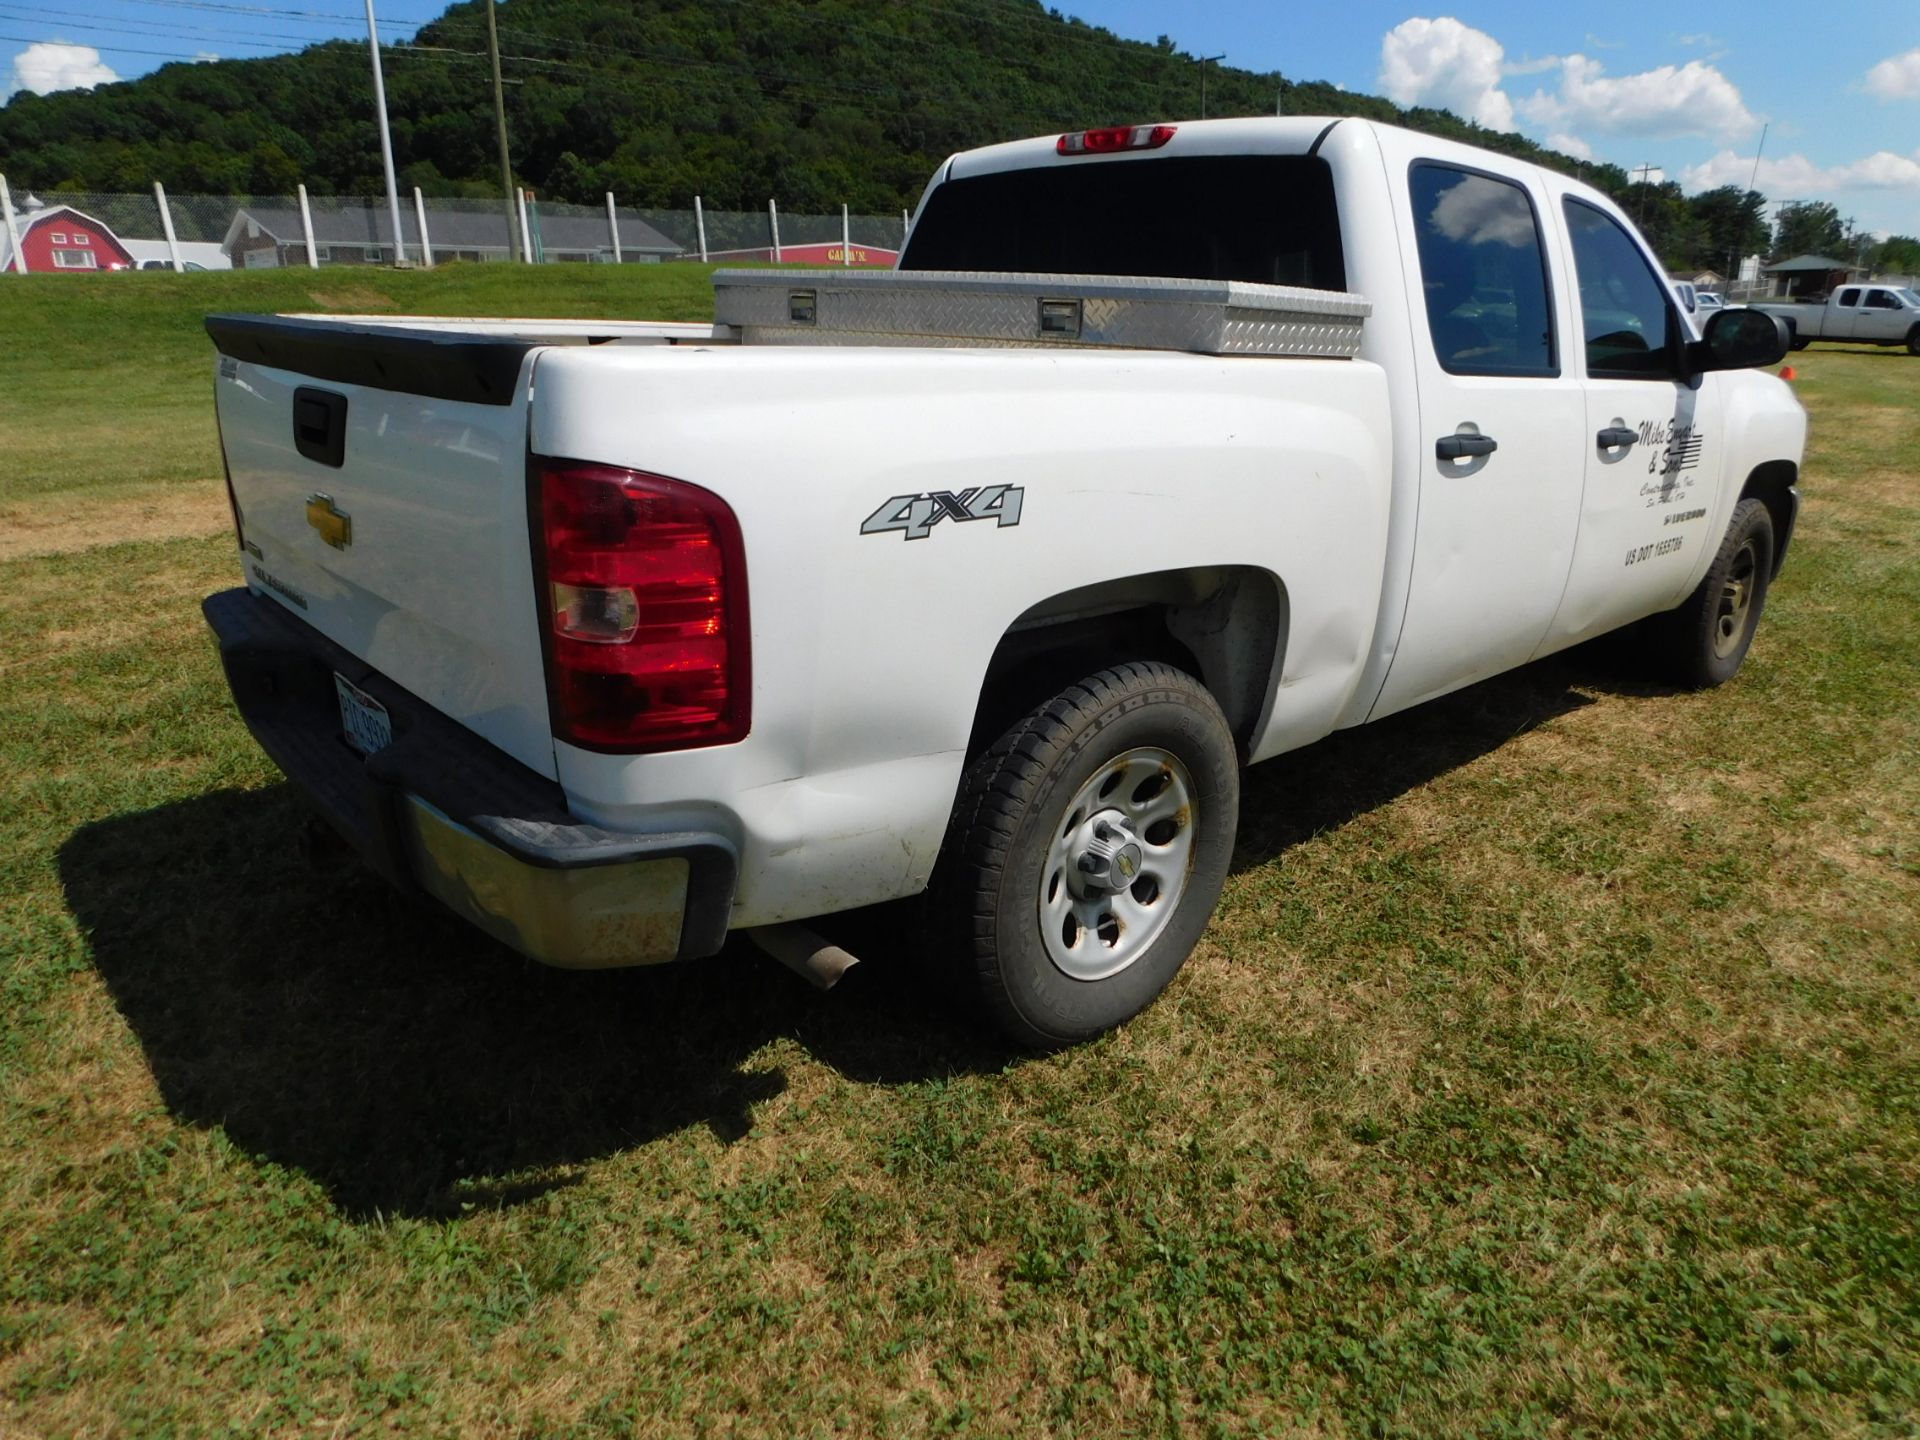 2011 Chevy 2500 Silverado Pickup, Crew Cab, 6' Bed, Automatic, AM/FM, 4WD, AC, PL, Aluminum Tool - Image 5 of 50